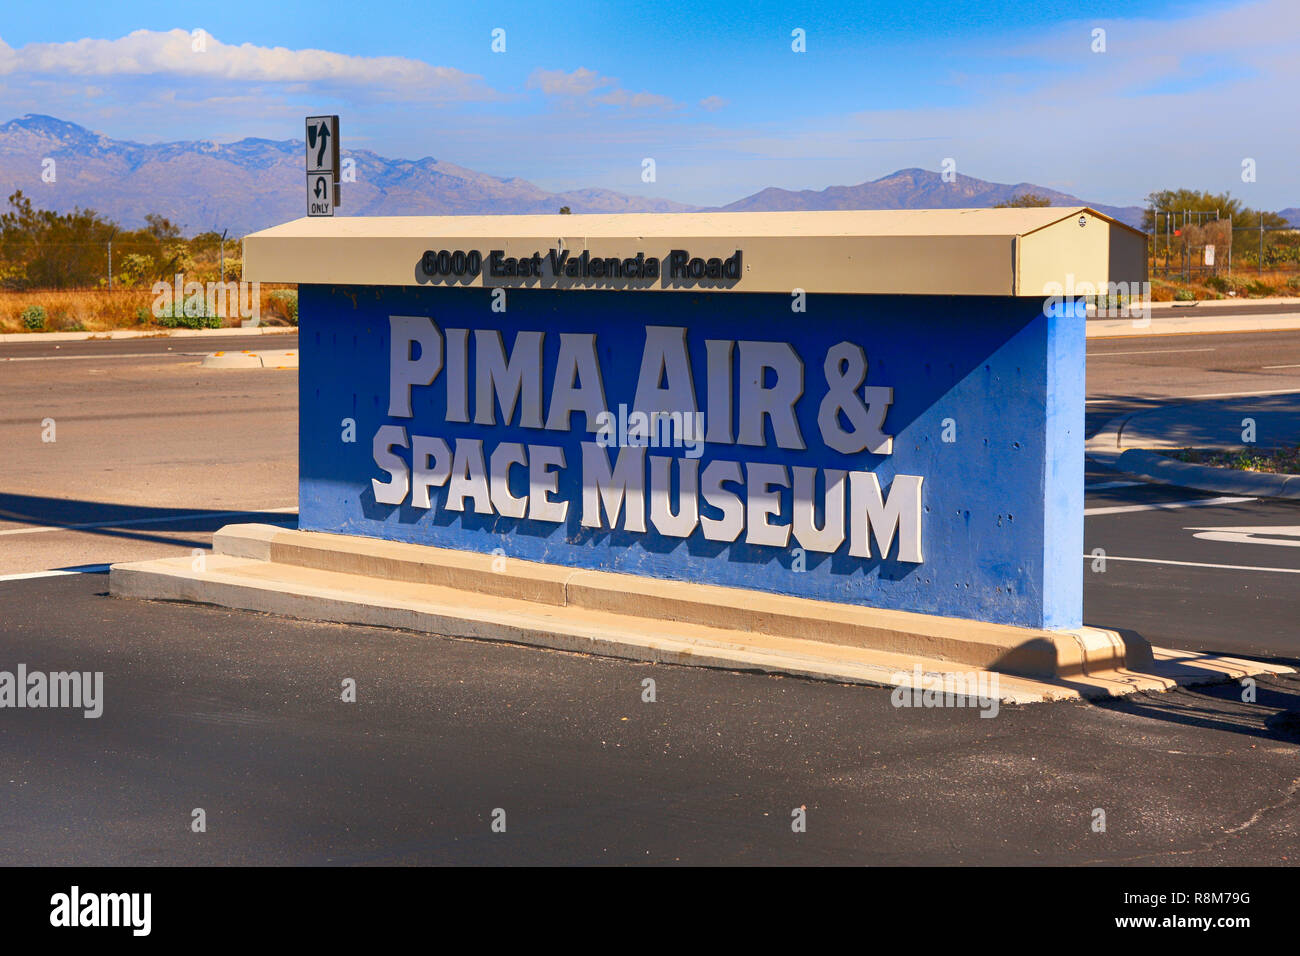 Entrance sign to the Pima Air & Space Museum in Tucson, Arizona Stock Photo